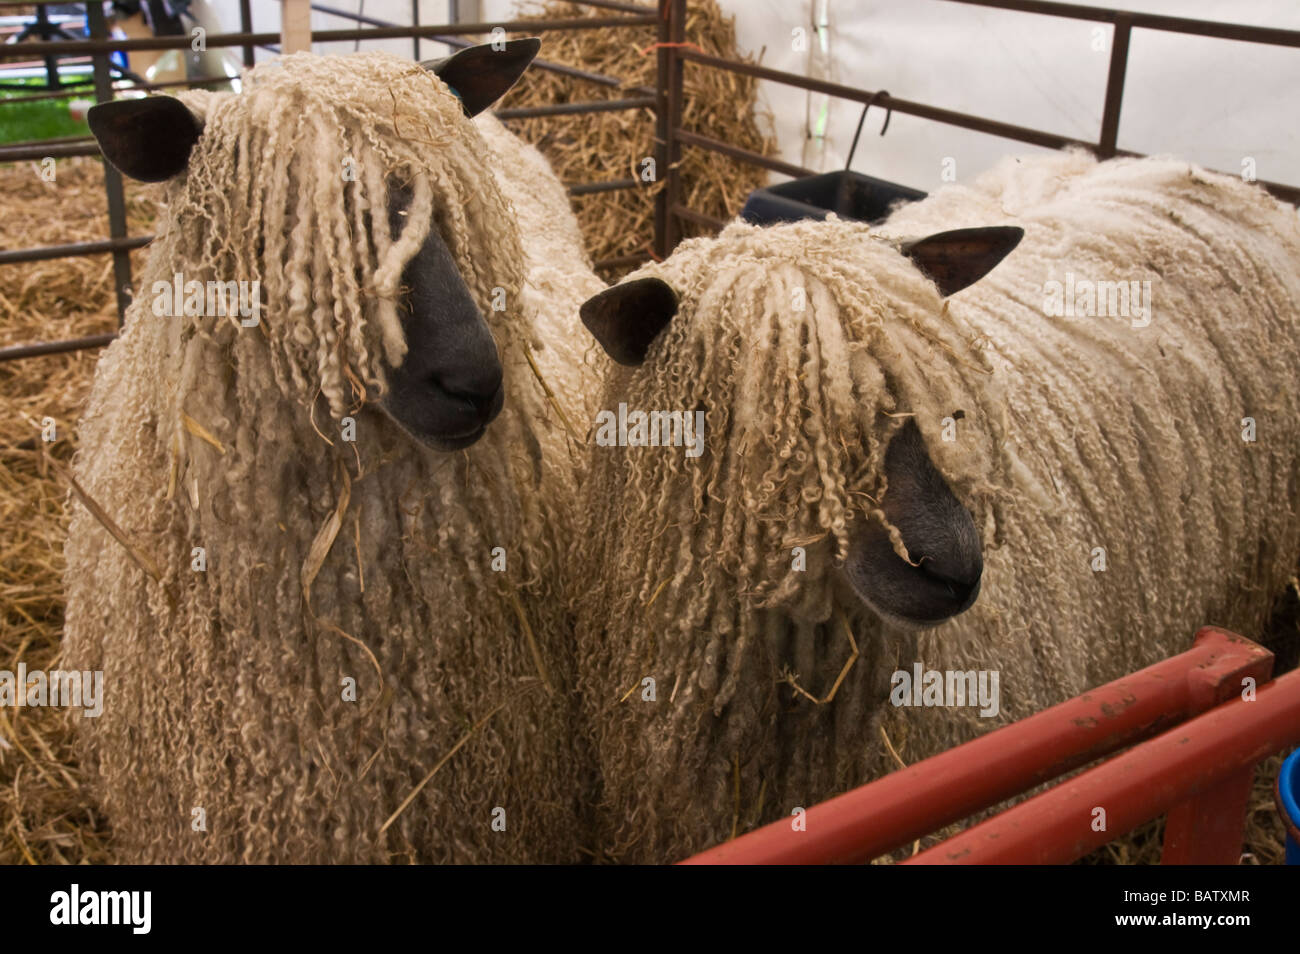 Two Wensleydale sheep in a pen Stock Photo